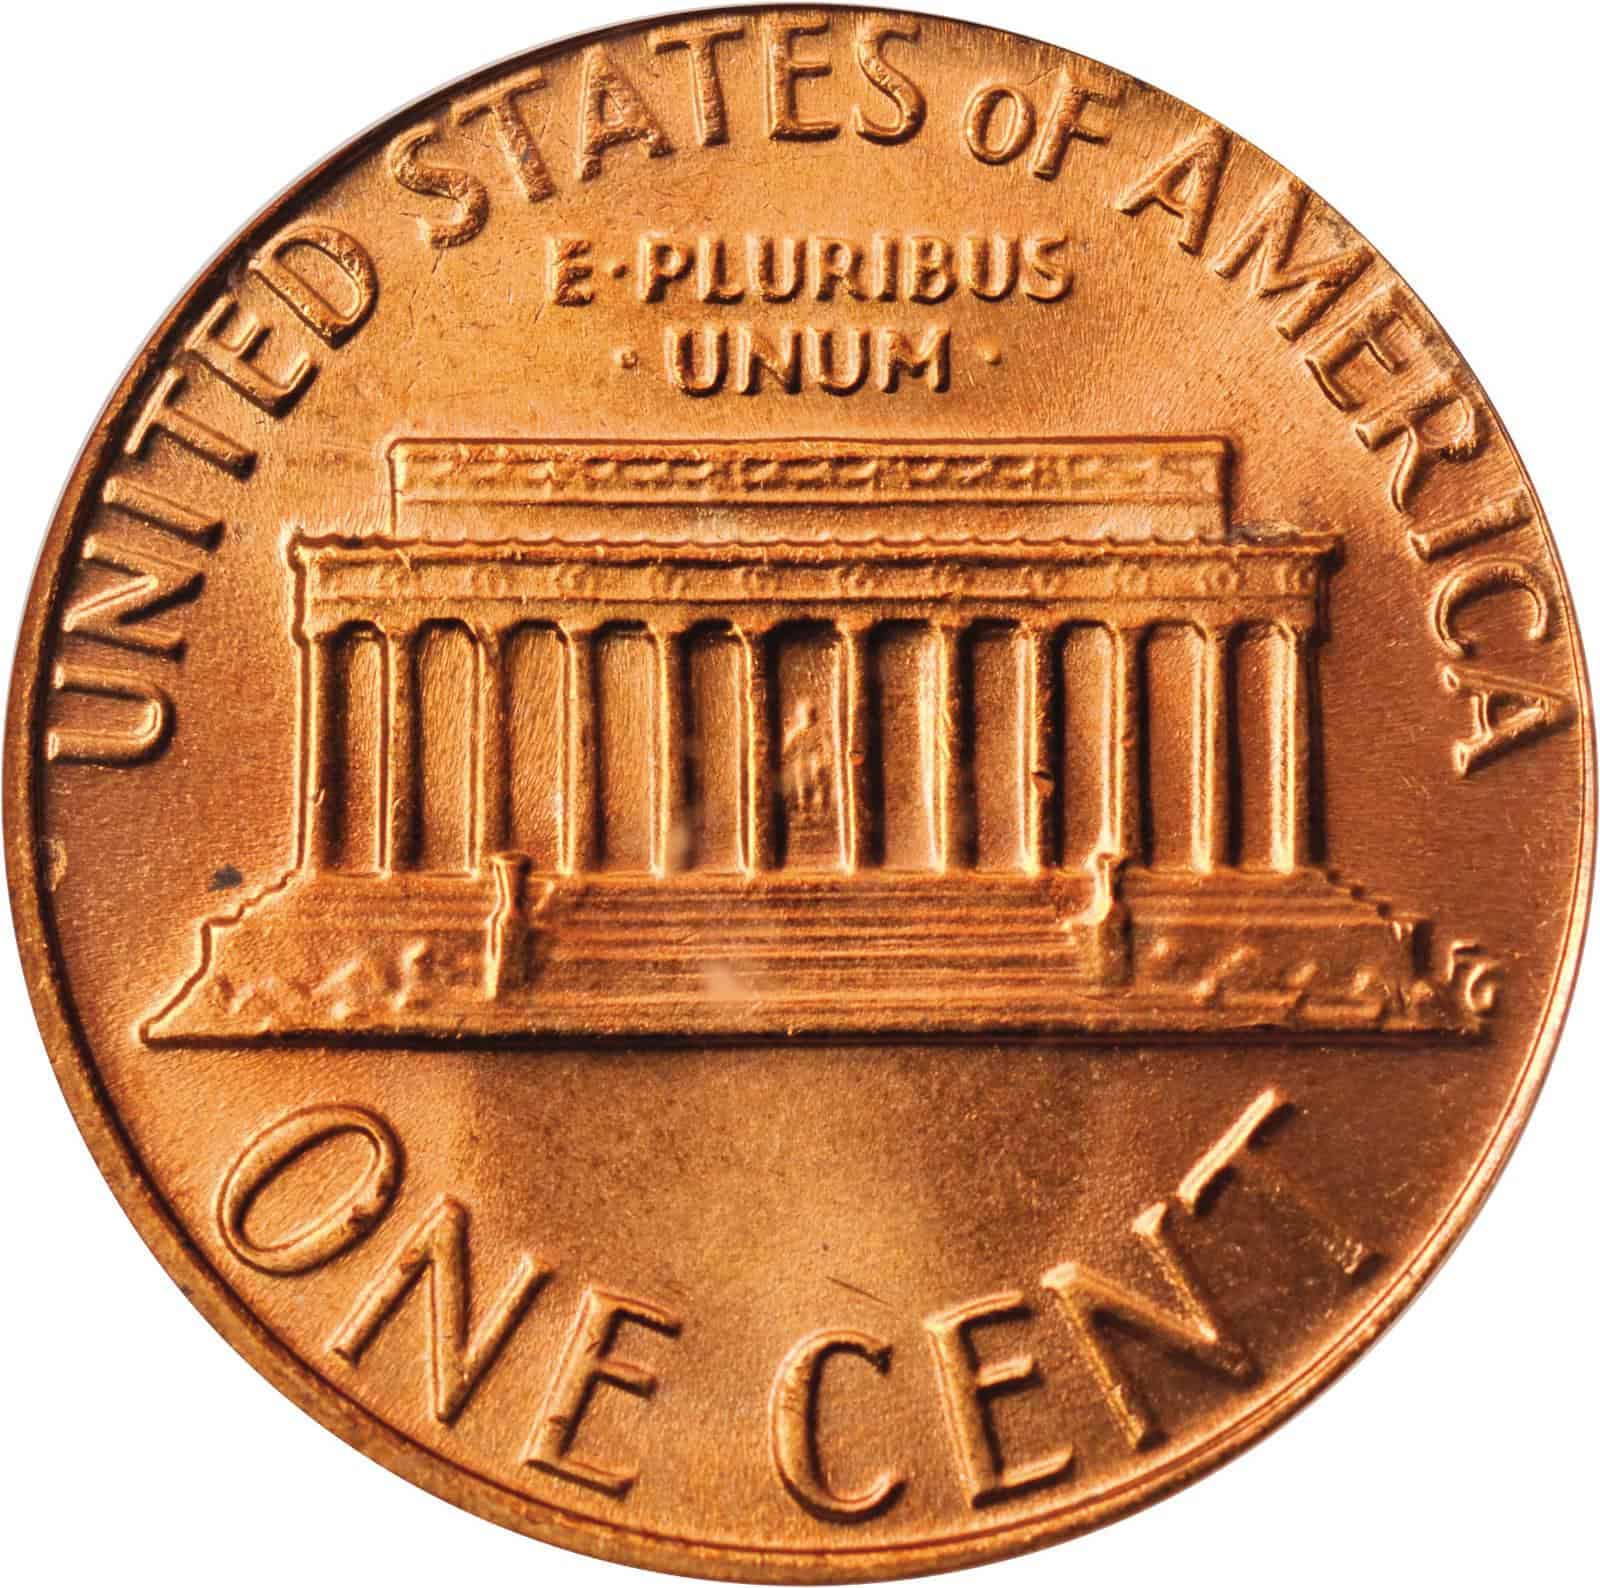 The Reverse of the 1981 Penny